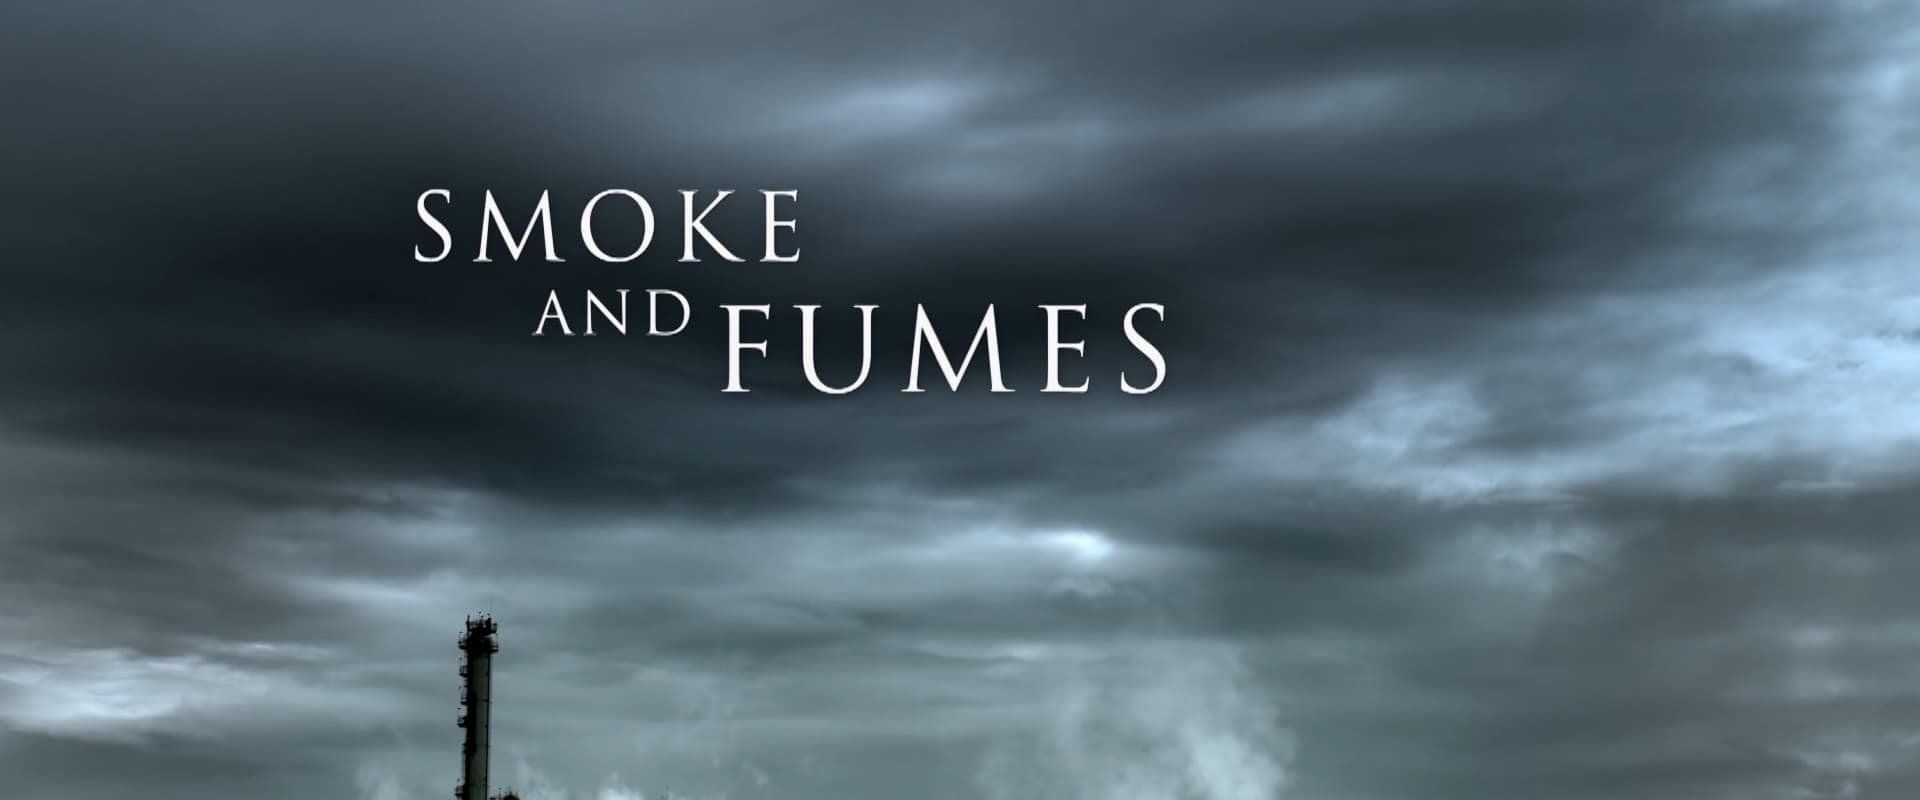 Smoke and Fumes: The Climate Change Cover-Up